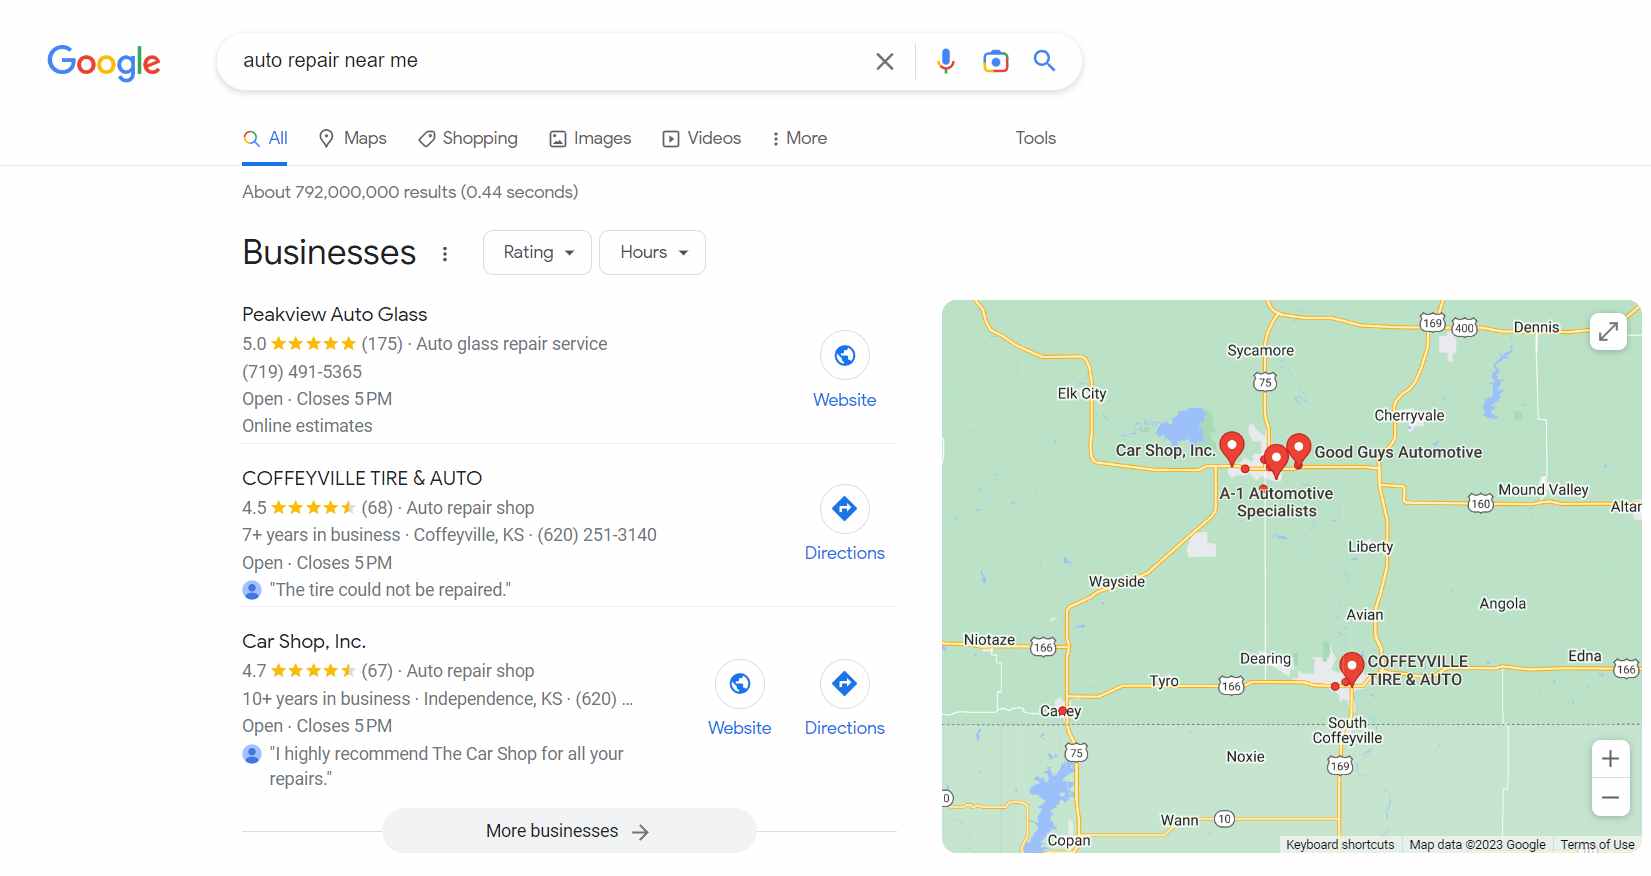 Google My Business listing for auto repair near me